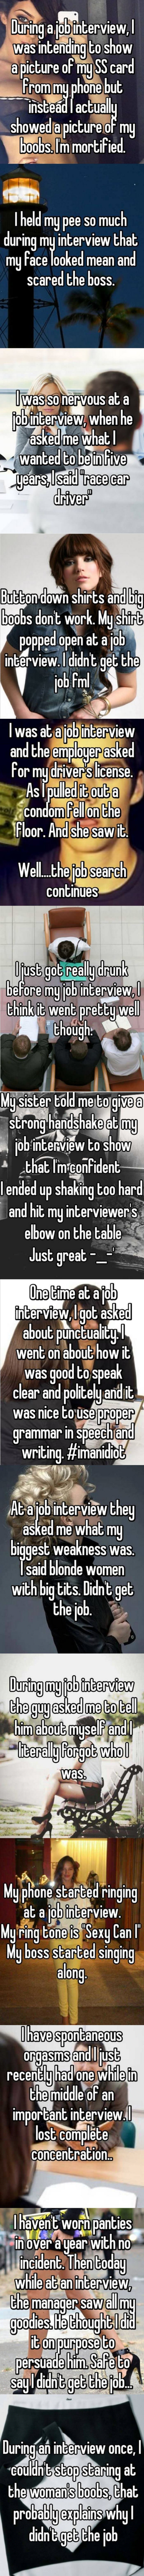 bad job interview experiences funny picture